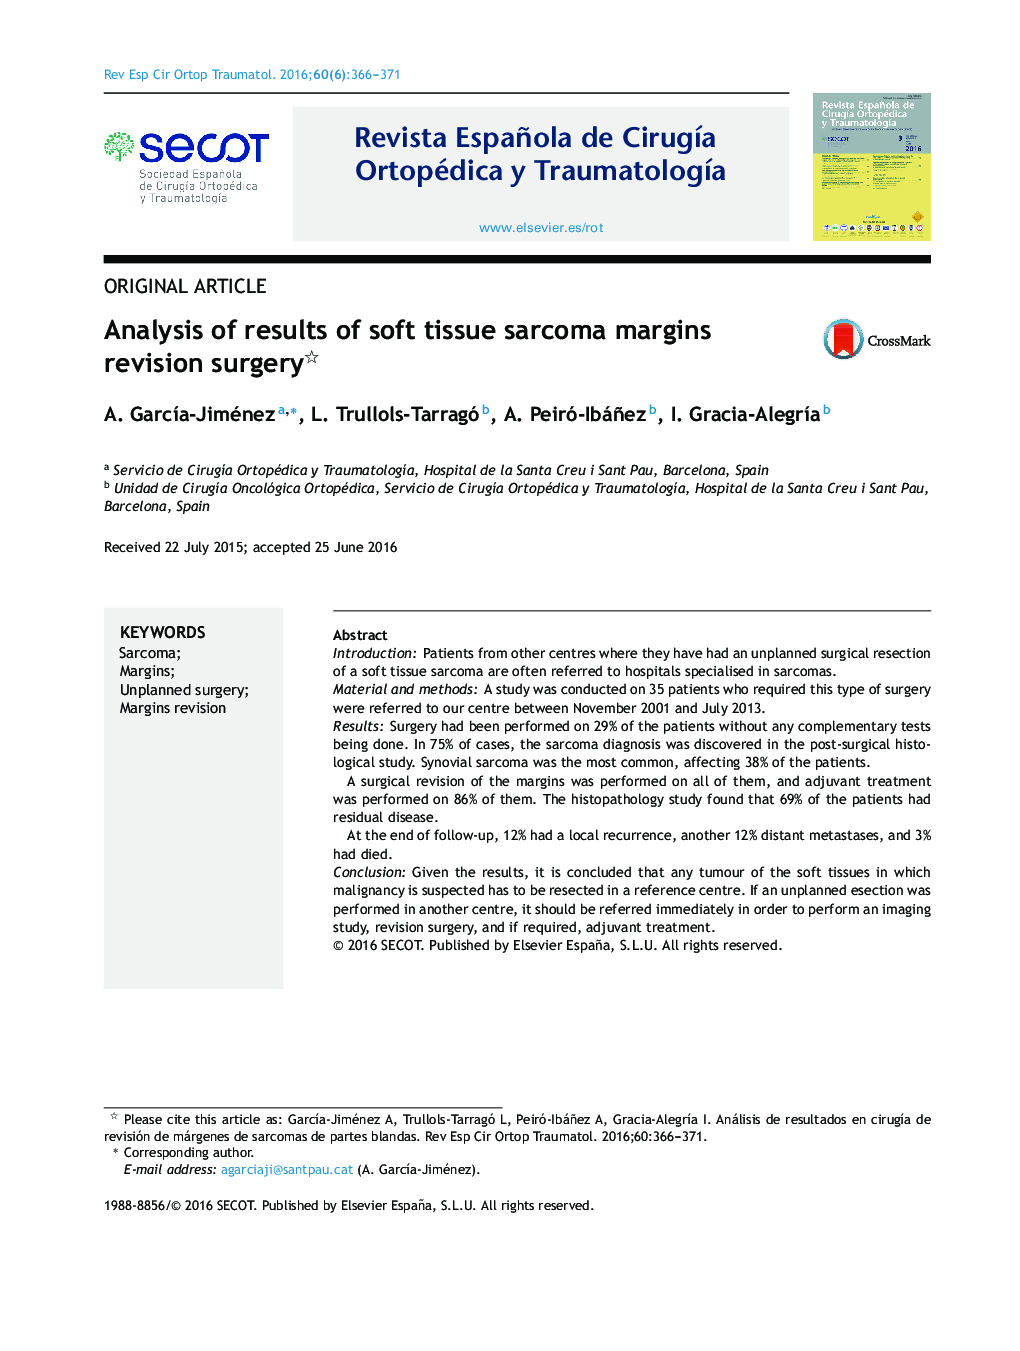 Analysis of results of soft tissue sarcoma margins revision surgery